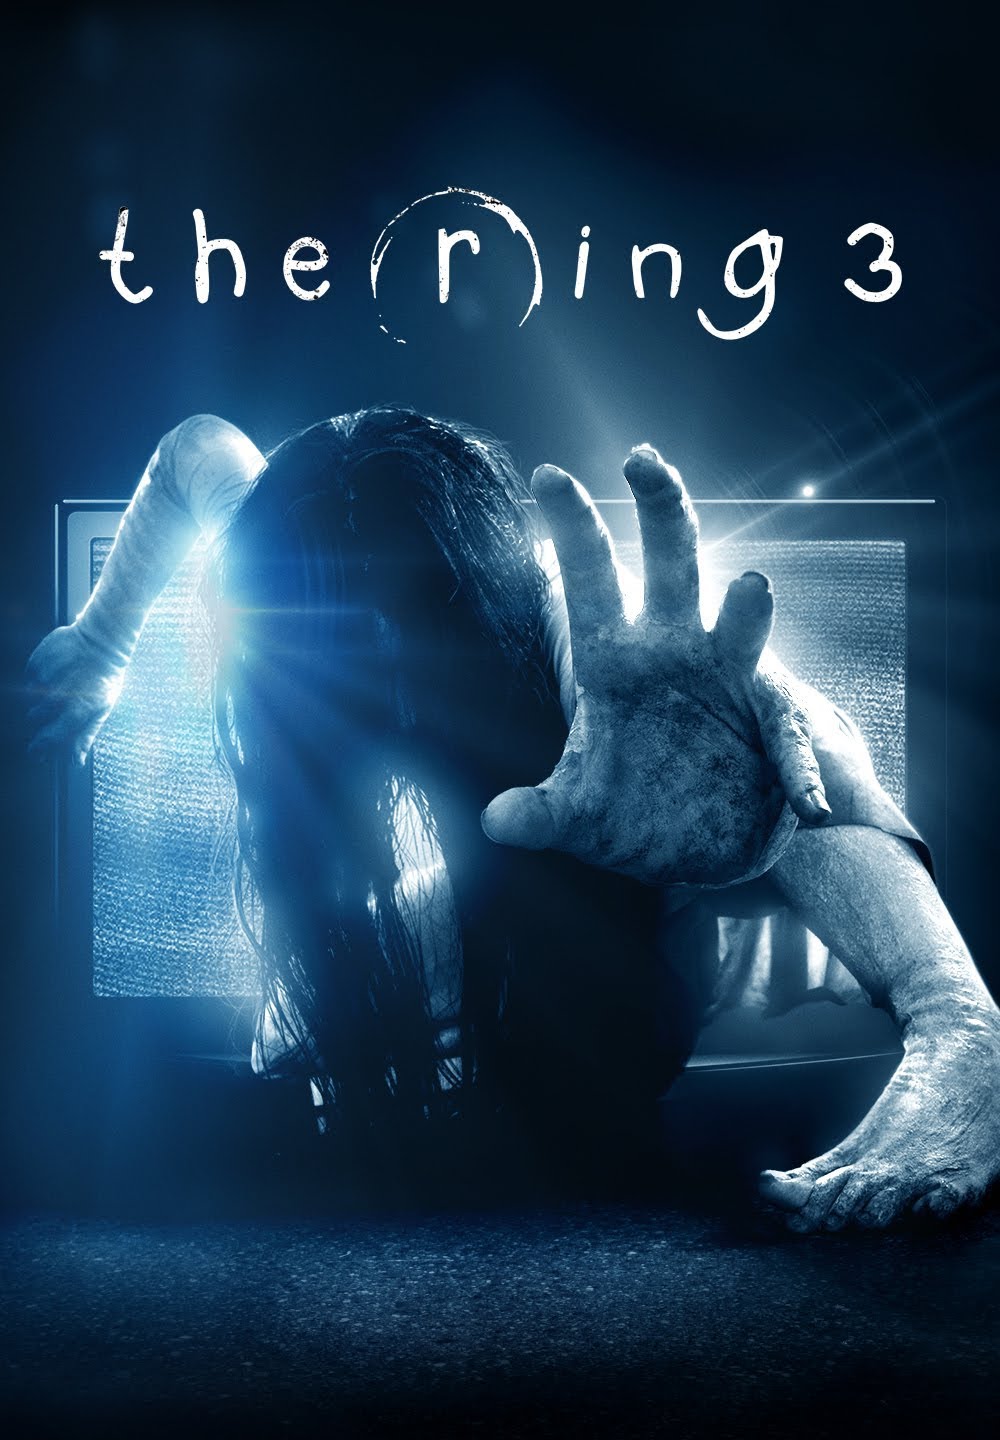 The Ring 3 [HD] (2017)